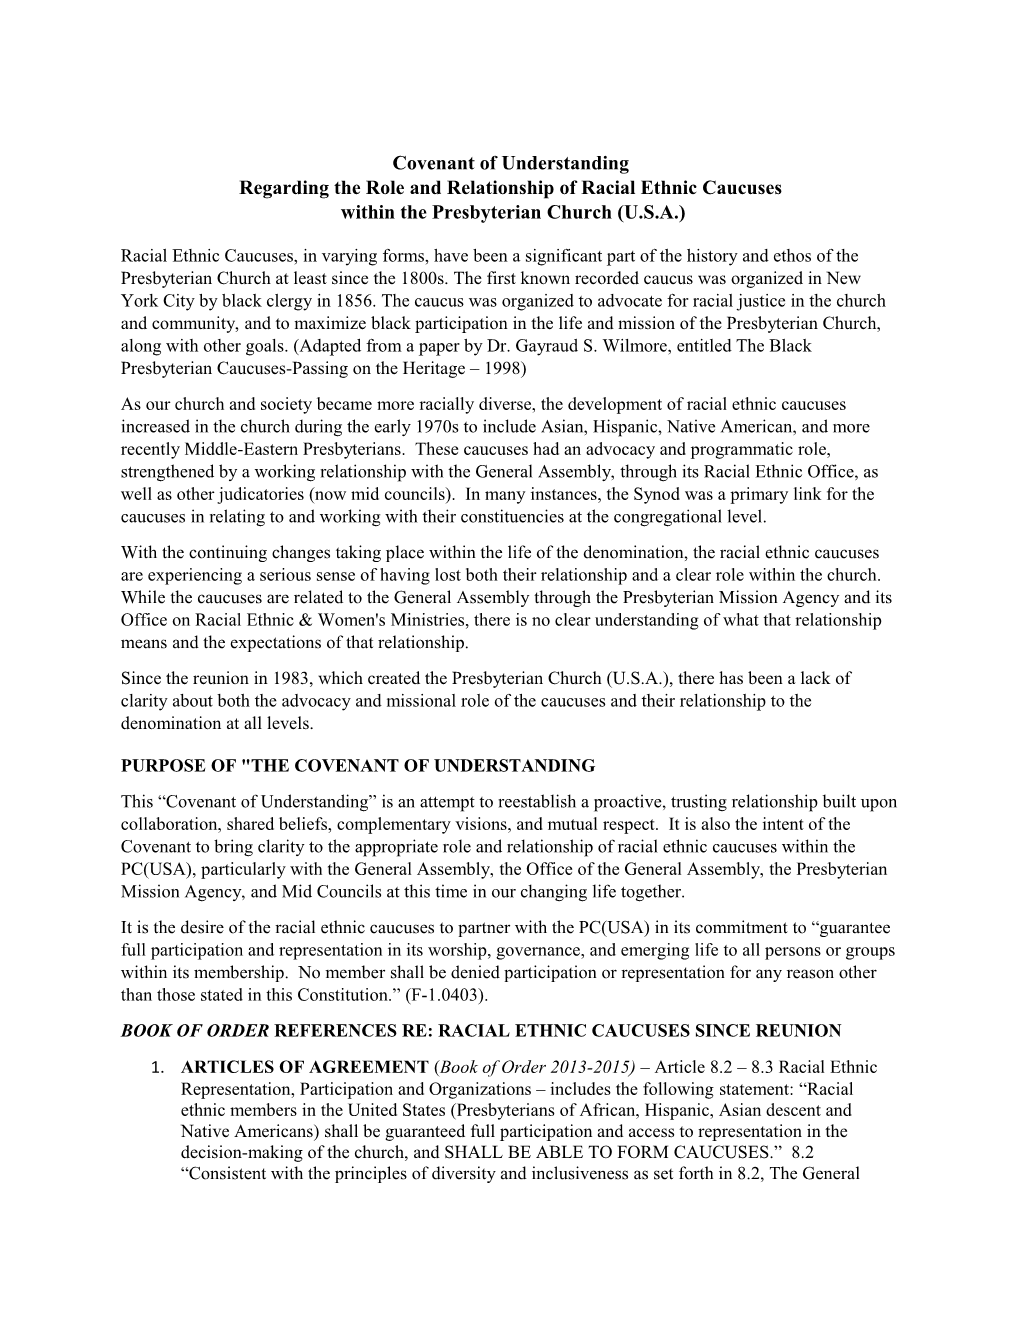 Covenant of Understanding Regarding the Role and Relationship of Racial Ethnic Caucuses